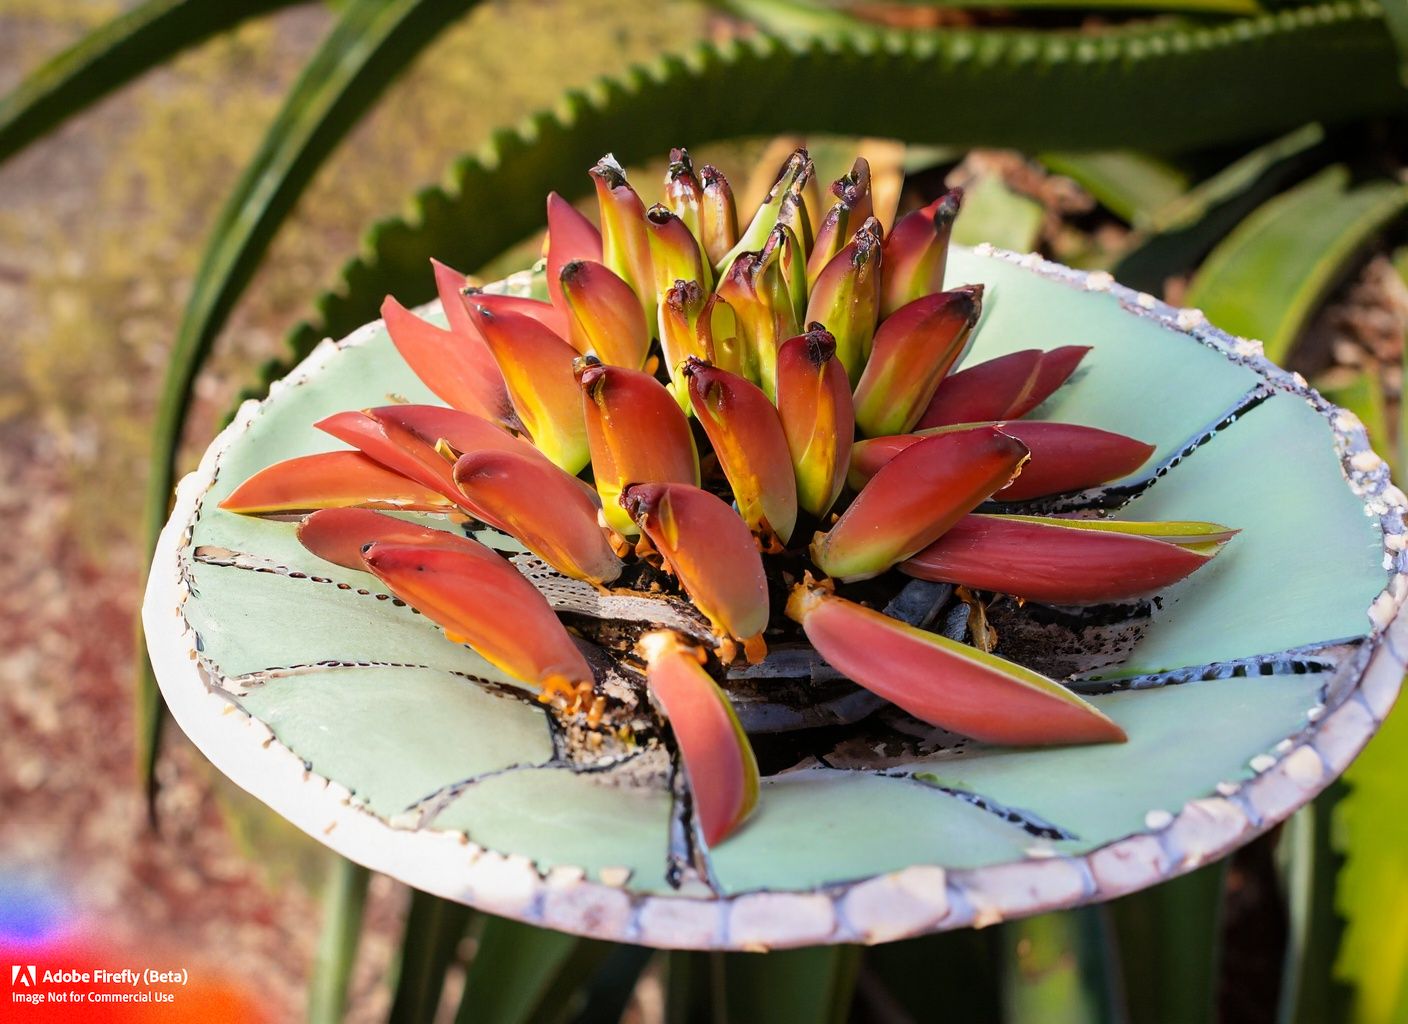 Colorful and delicious maguey flowers add a unique twist to traditional Mexican cuisine.